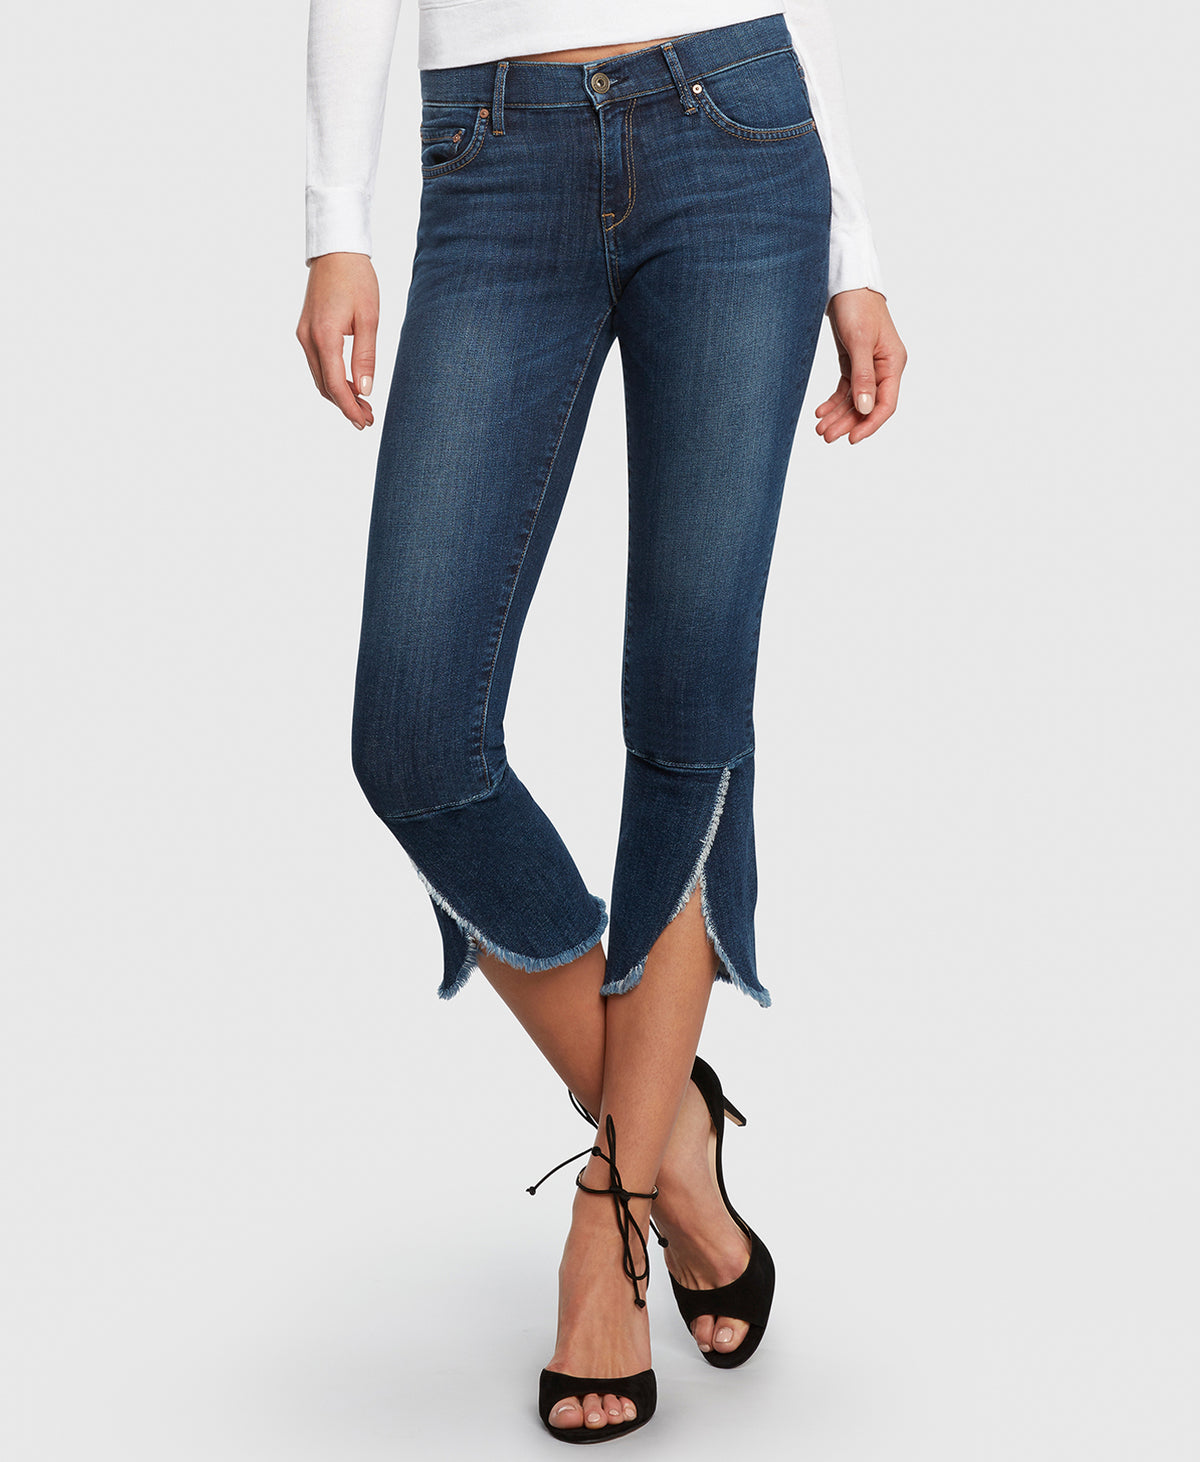 Principle FLIRT in Promise cropped jeans detail